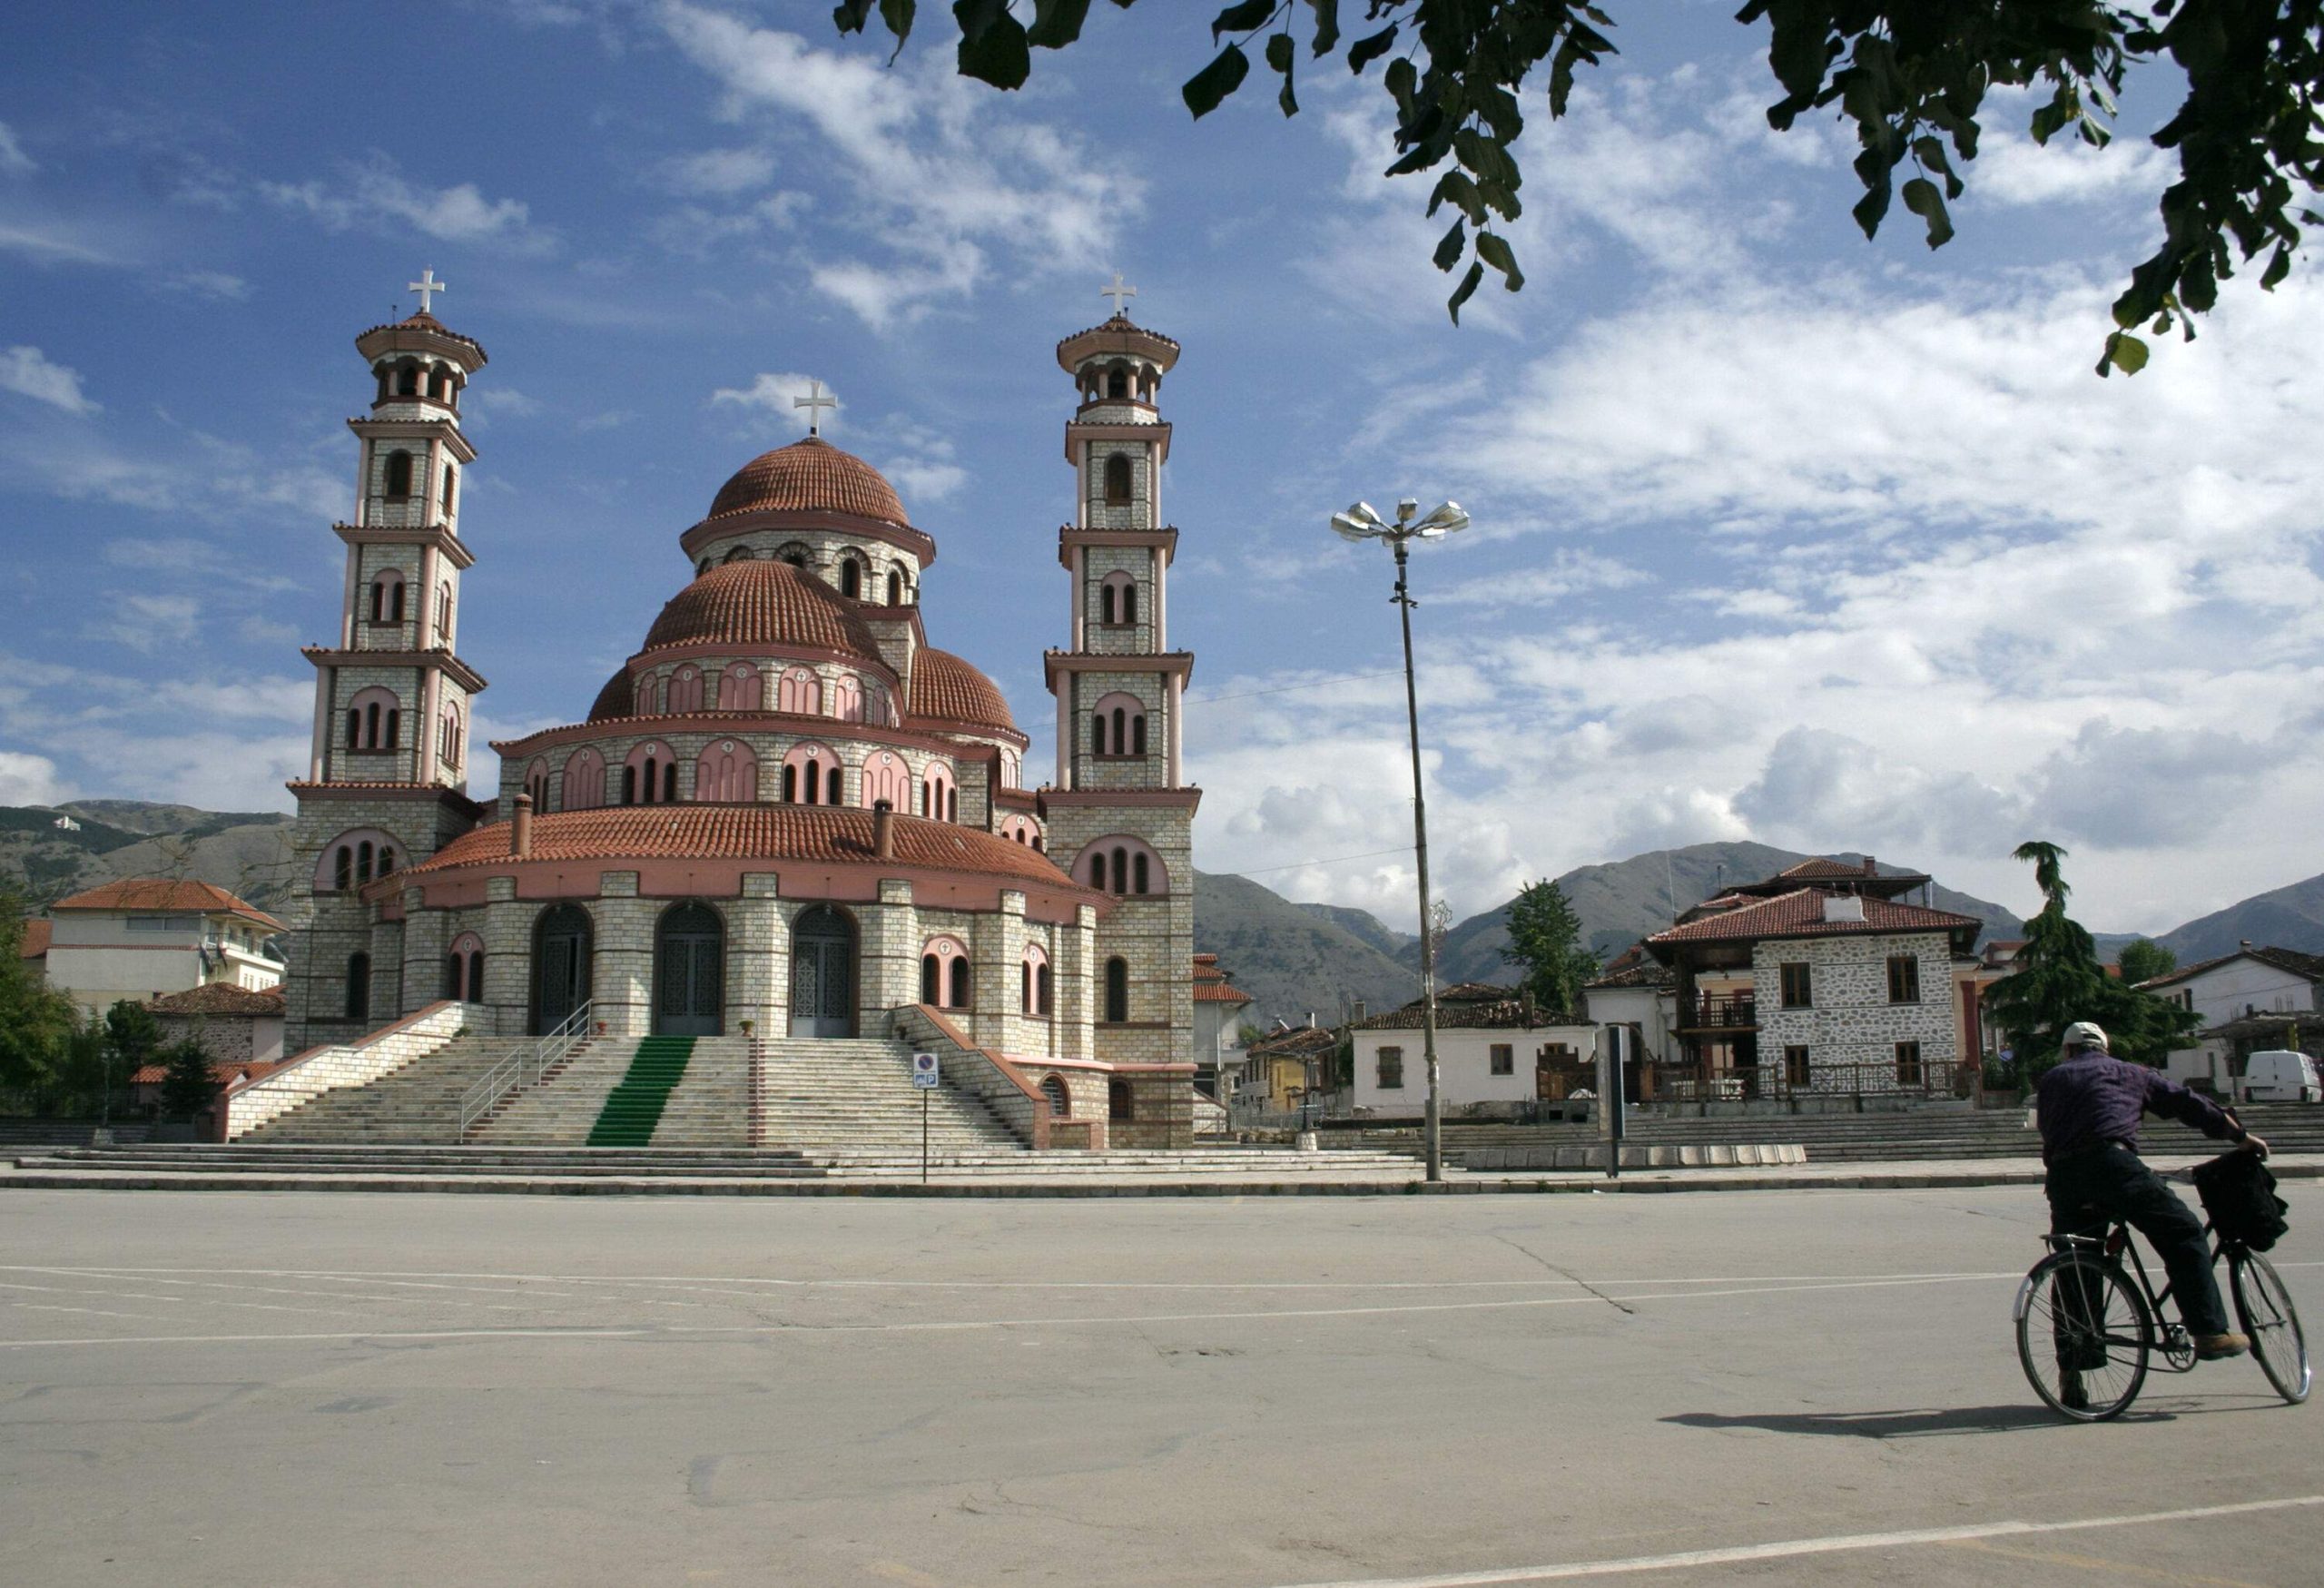 A person on a bicycle pauses to admire the Resurrection Cathedral in Korçë, with its grand domed structure and elegant bell towers, standing as a symbol of faith and devotion.